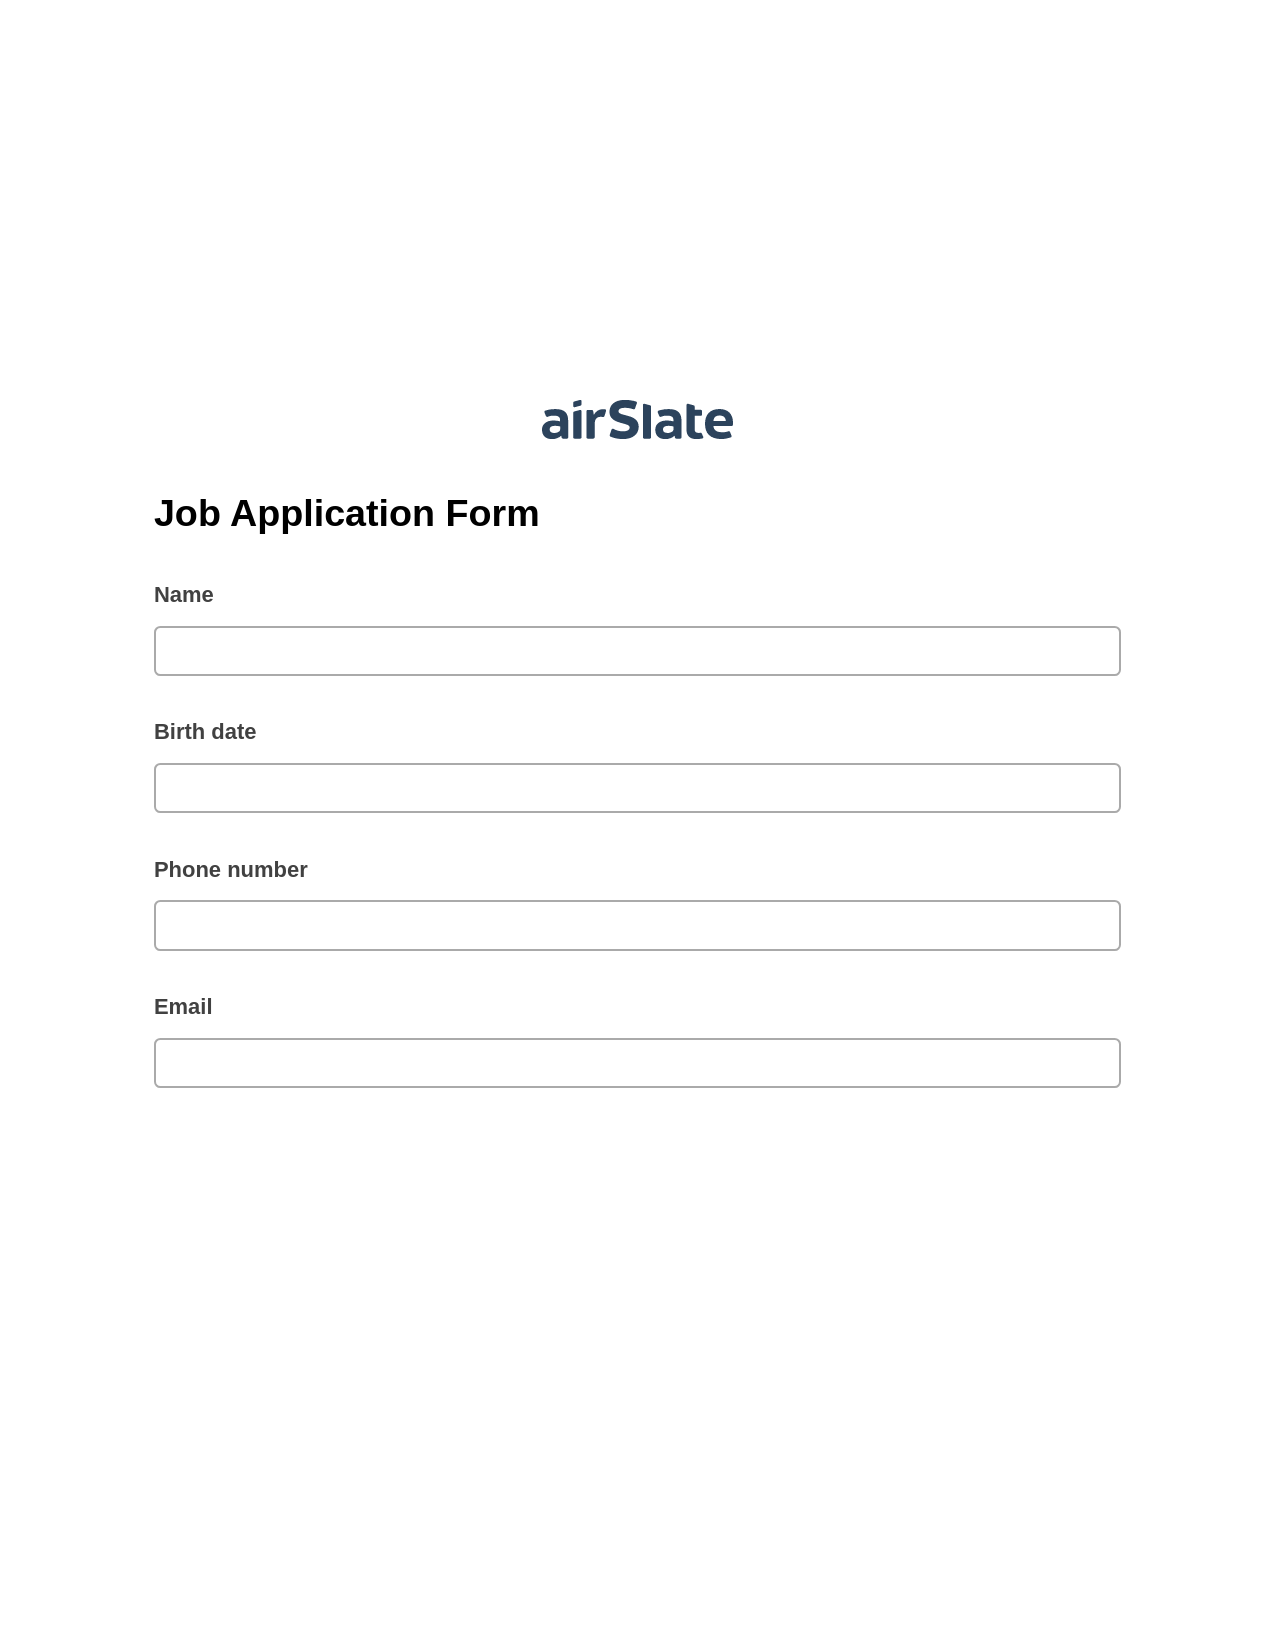 Job Application Form Pre-fill Slate from MS Dynamics 365 Records Bot, System Bot - Create a Slate in another Flow, Post-finish Document Bot